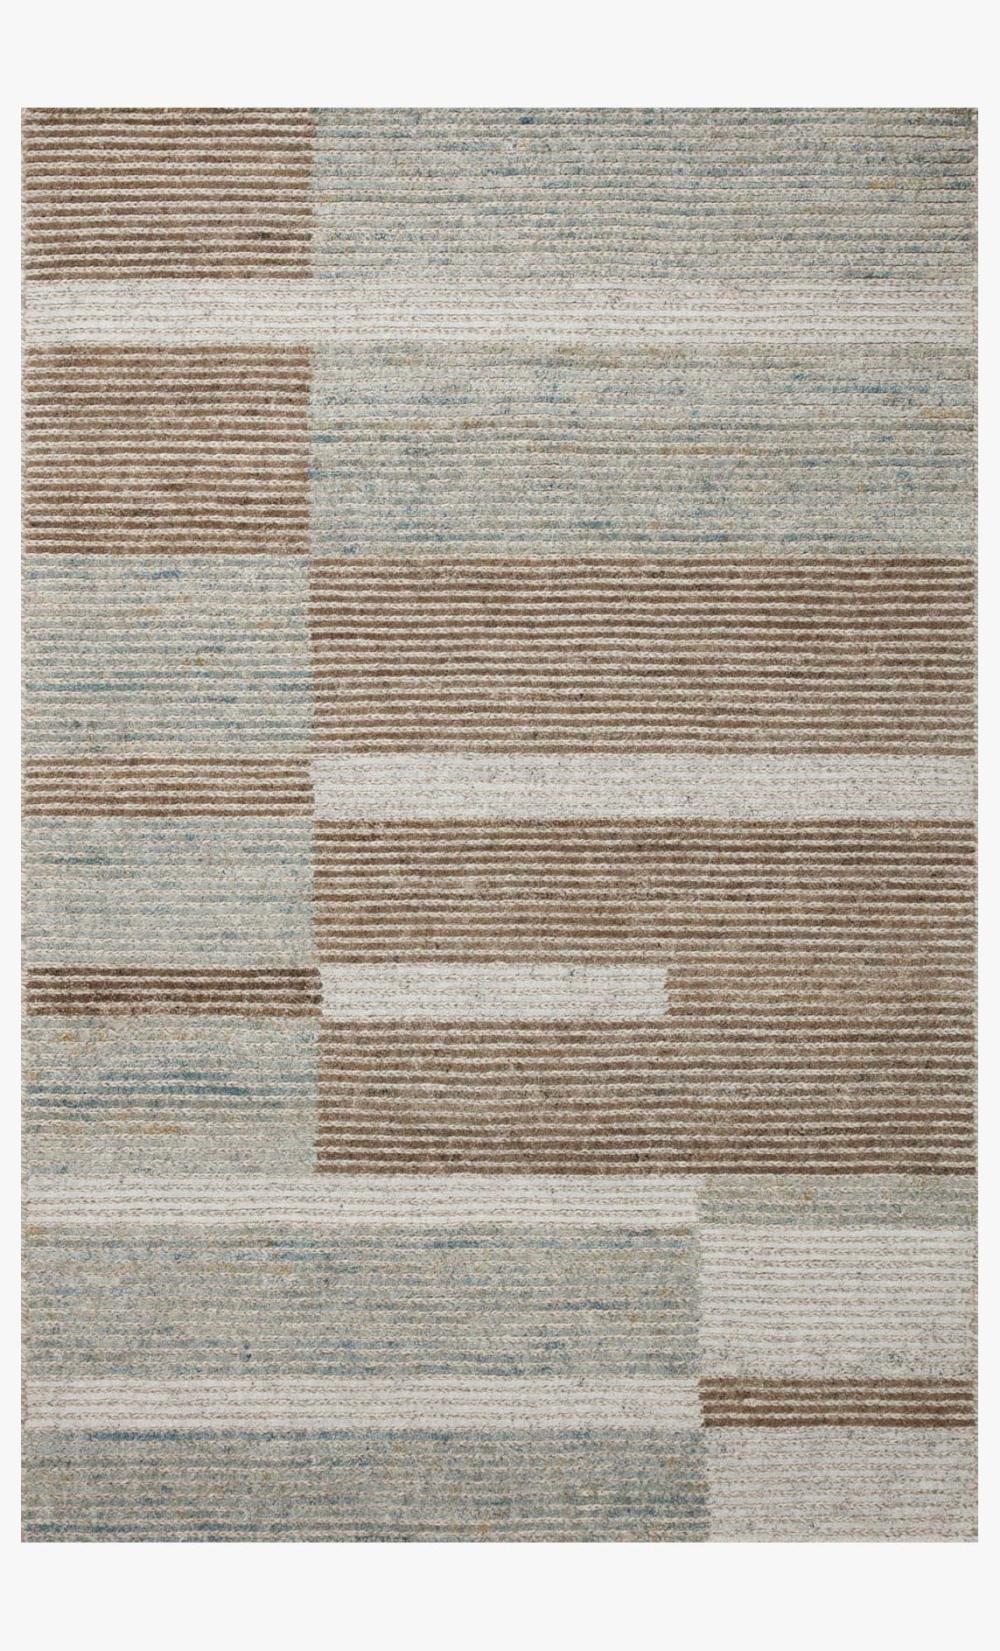 Hand-tufted rug, 100% wool construction, homage to mid-century design with a modern twist, durable, warm, and luxurious.